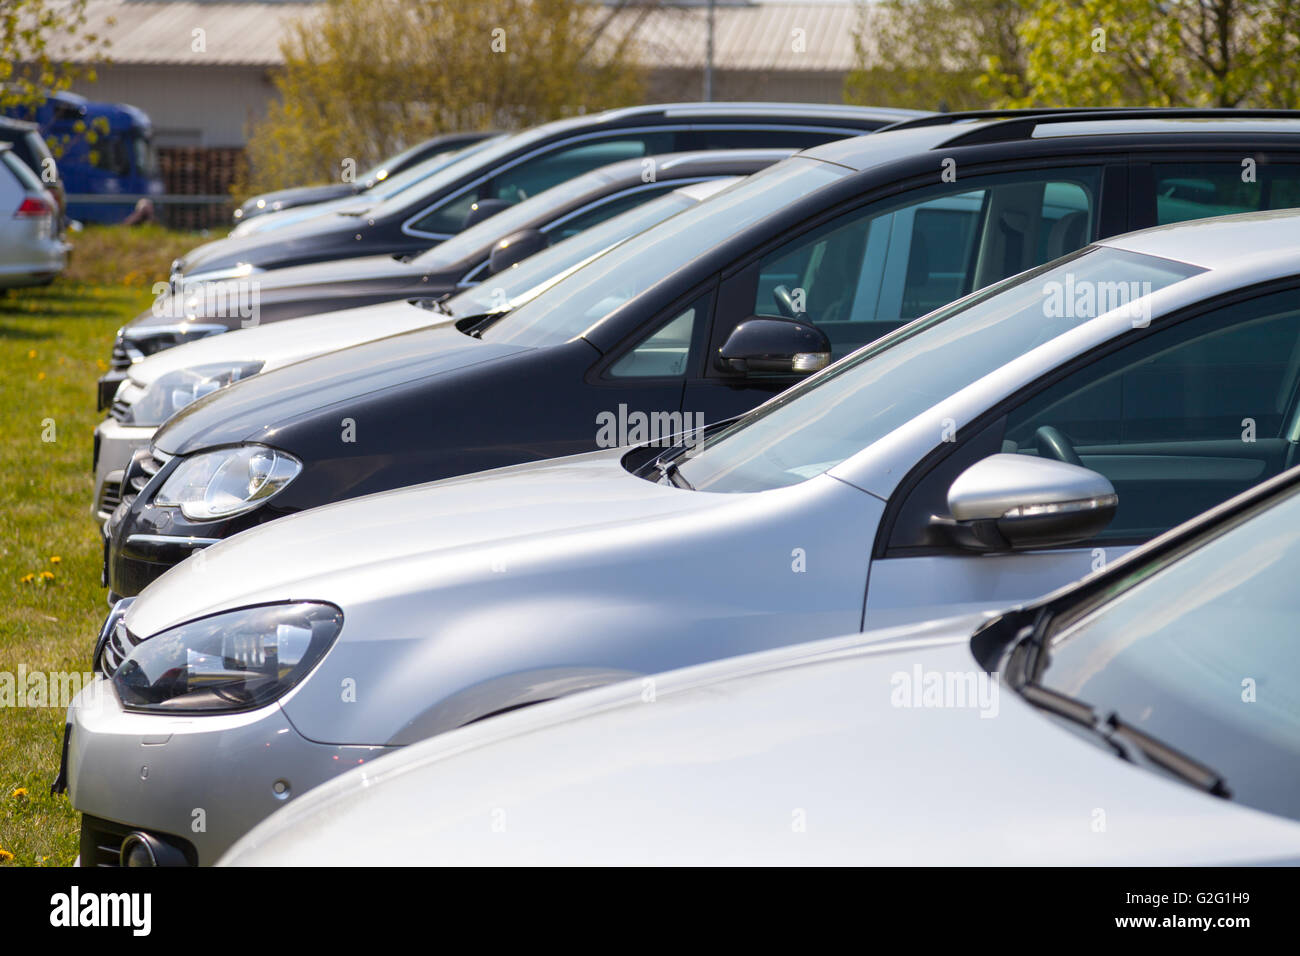 ALTENTREPTOW / GERMANY - MAY 1, 2016: Volkswagen cars stands on car dealer in altentreptow, germany at may 1, 2016. Stock Photo